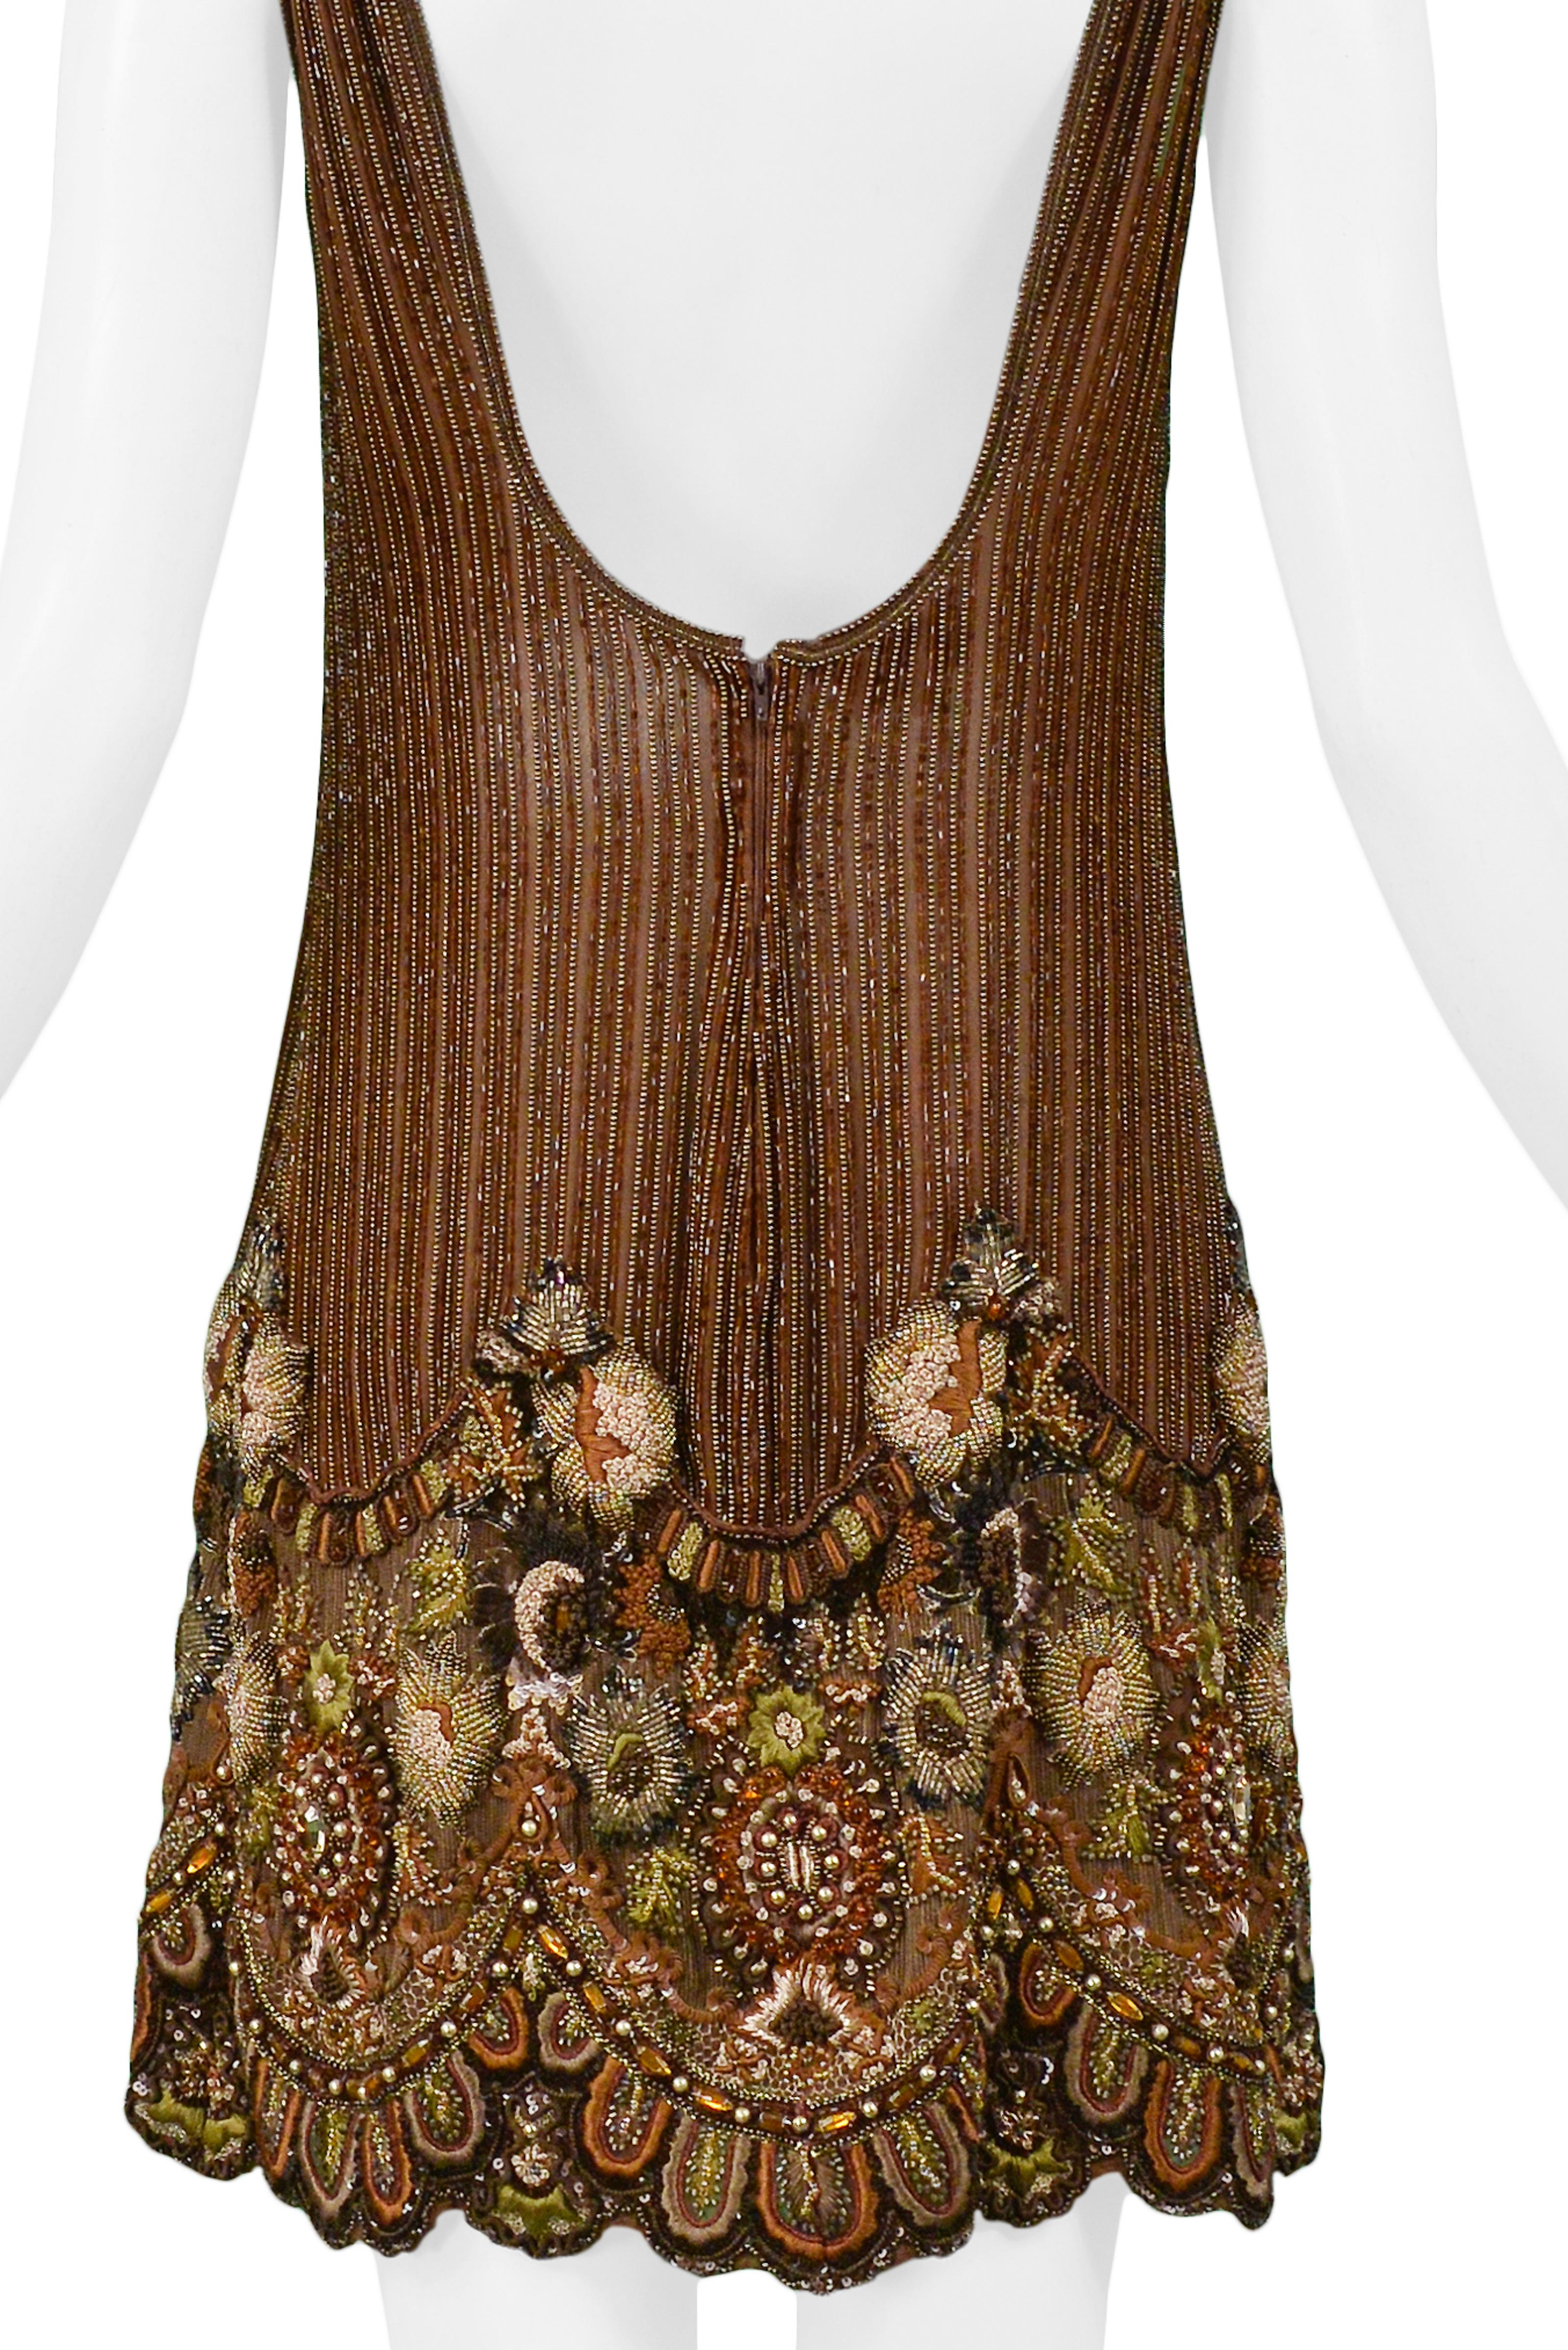 Women's Vintage Valentino Heavily Beaded Floral Mini Dress For Sale